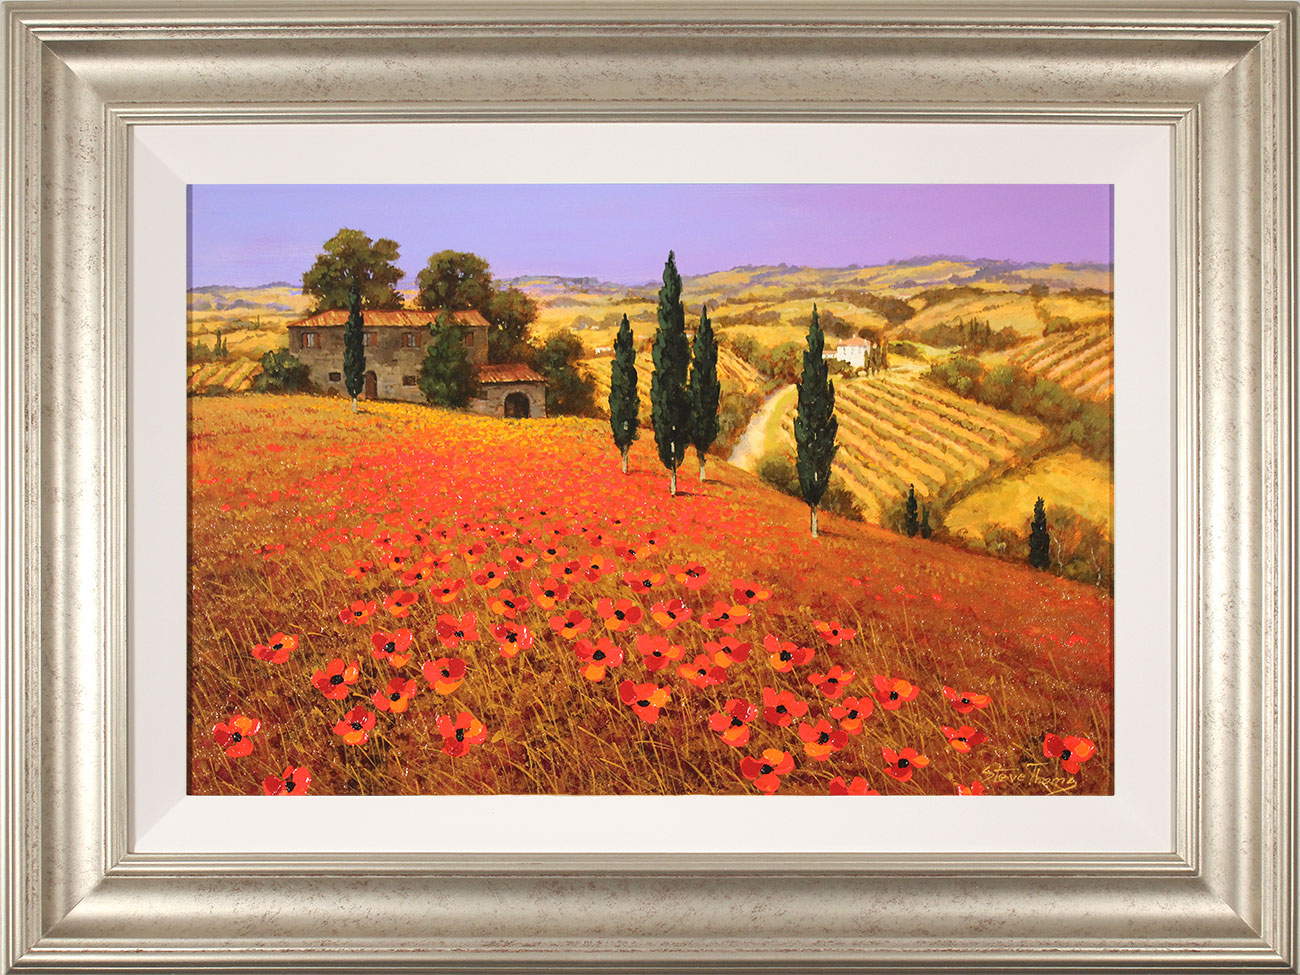 Steve Thoms, Original oil painting on panel, Tuscan Poppies. Click to enlarge